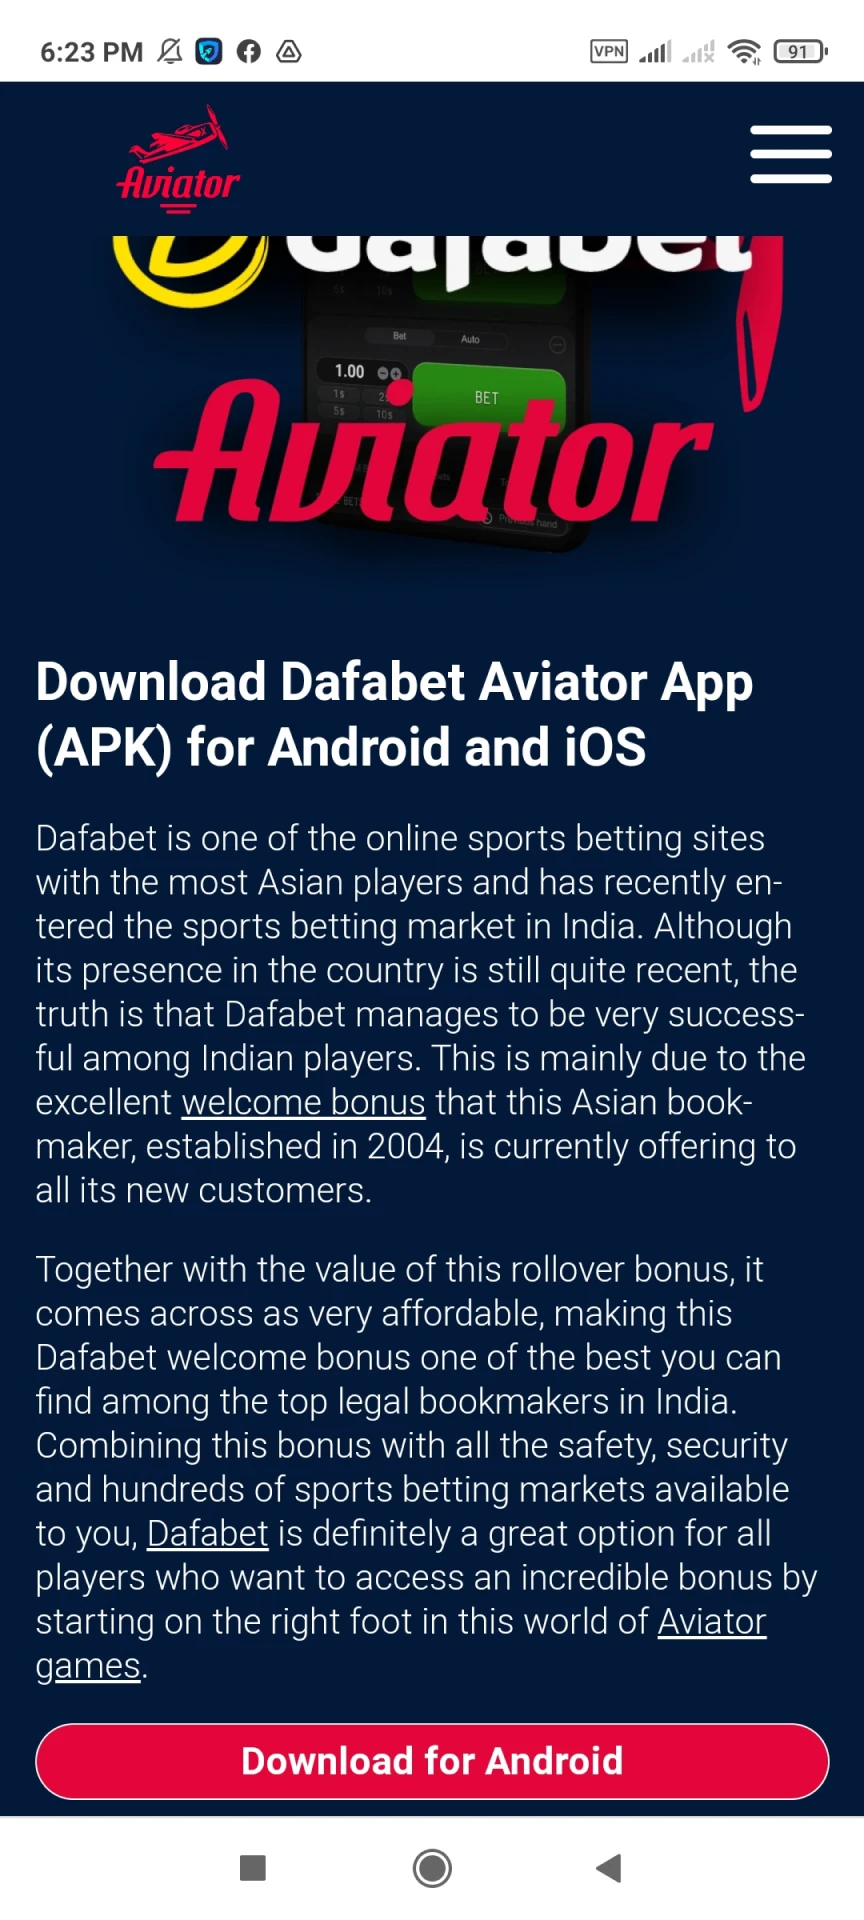 Play Aviator on Dafabet through your Android device.